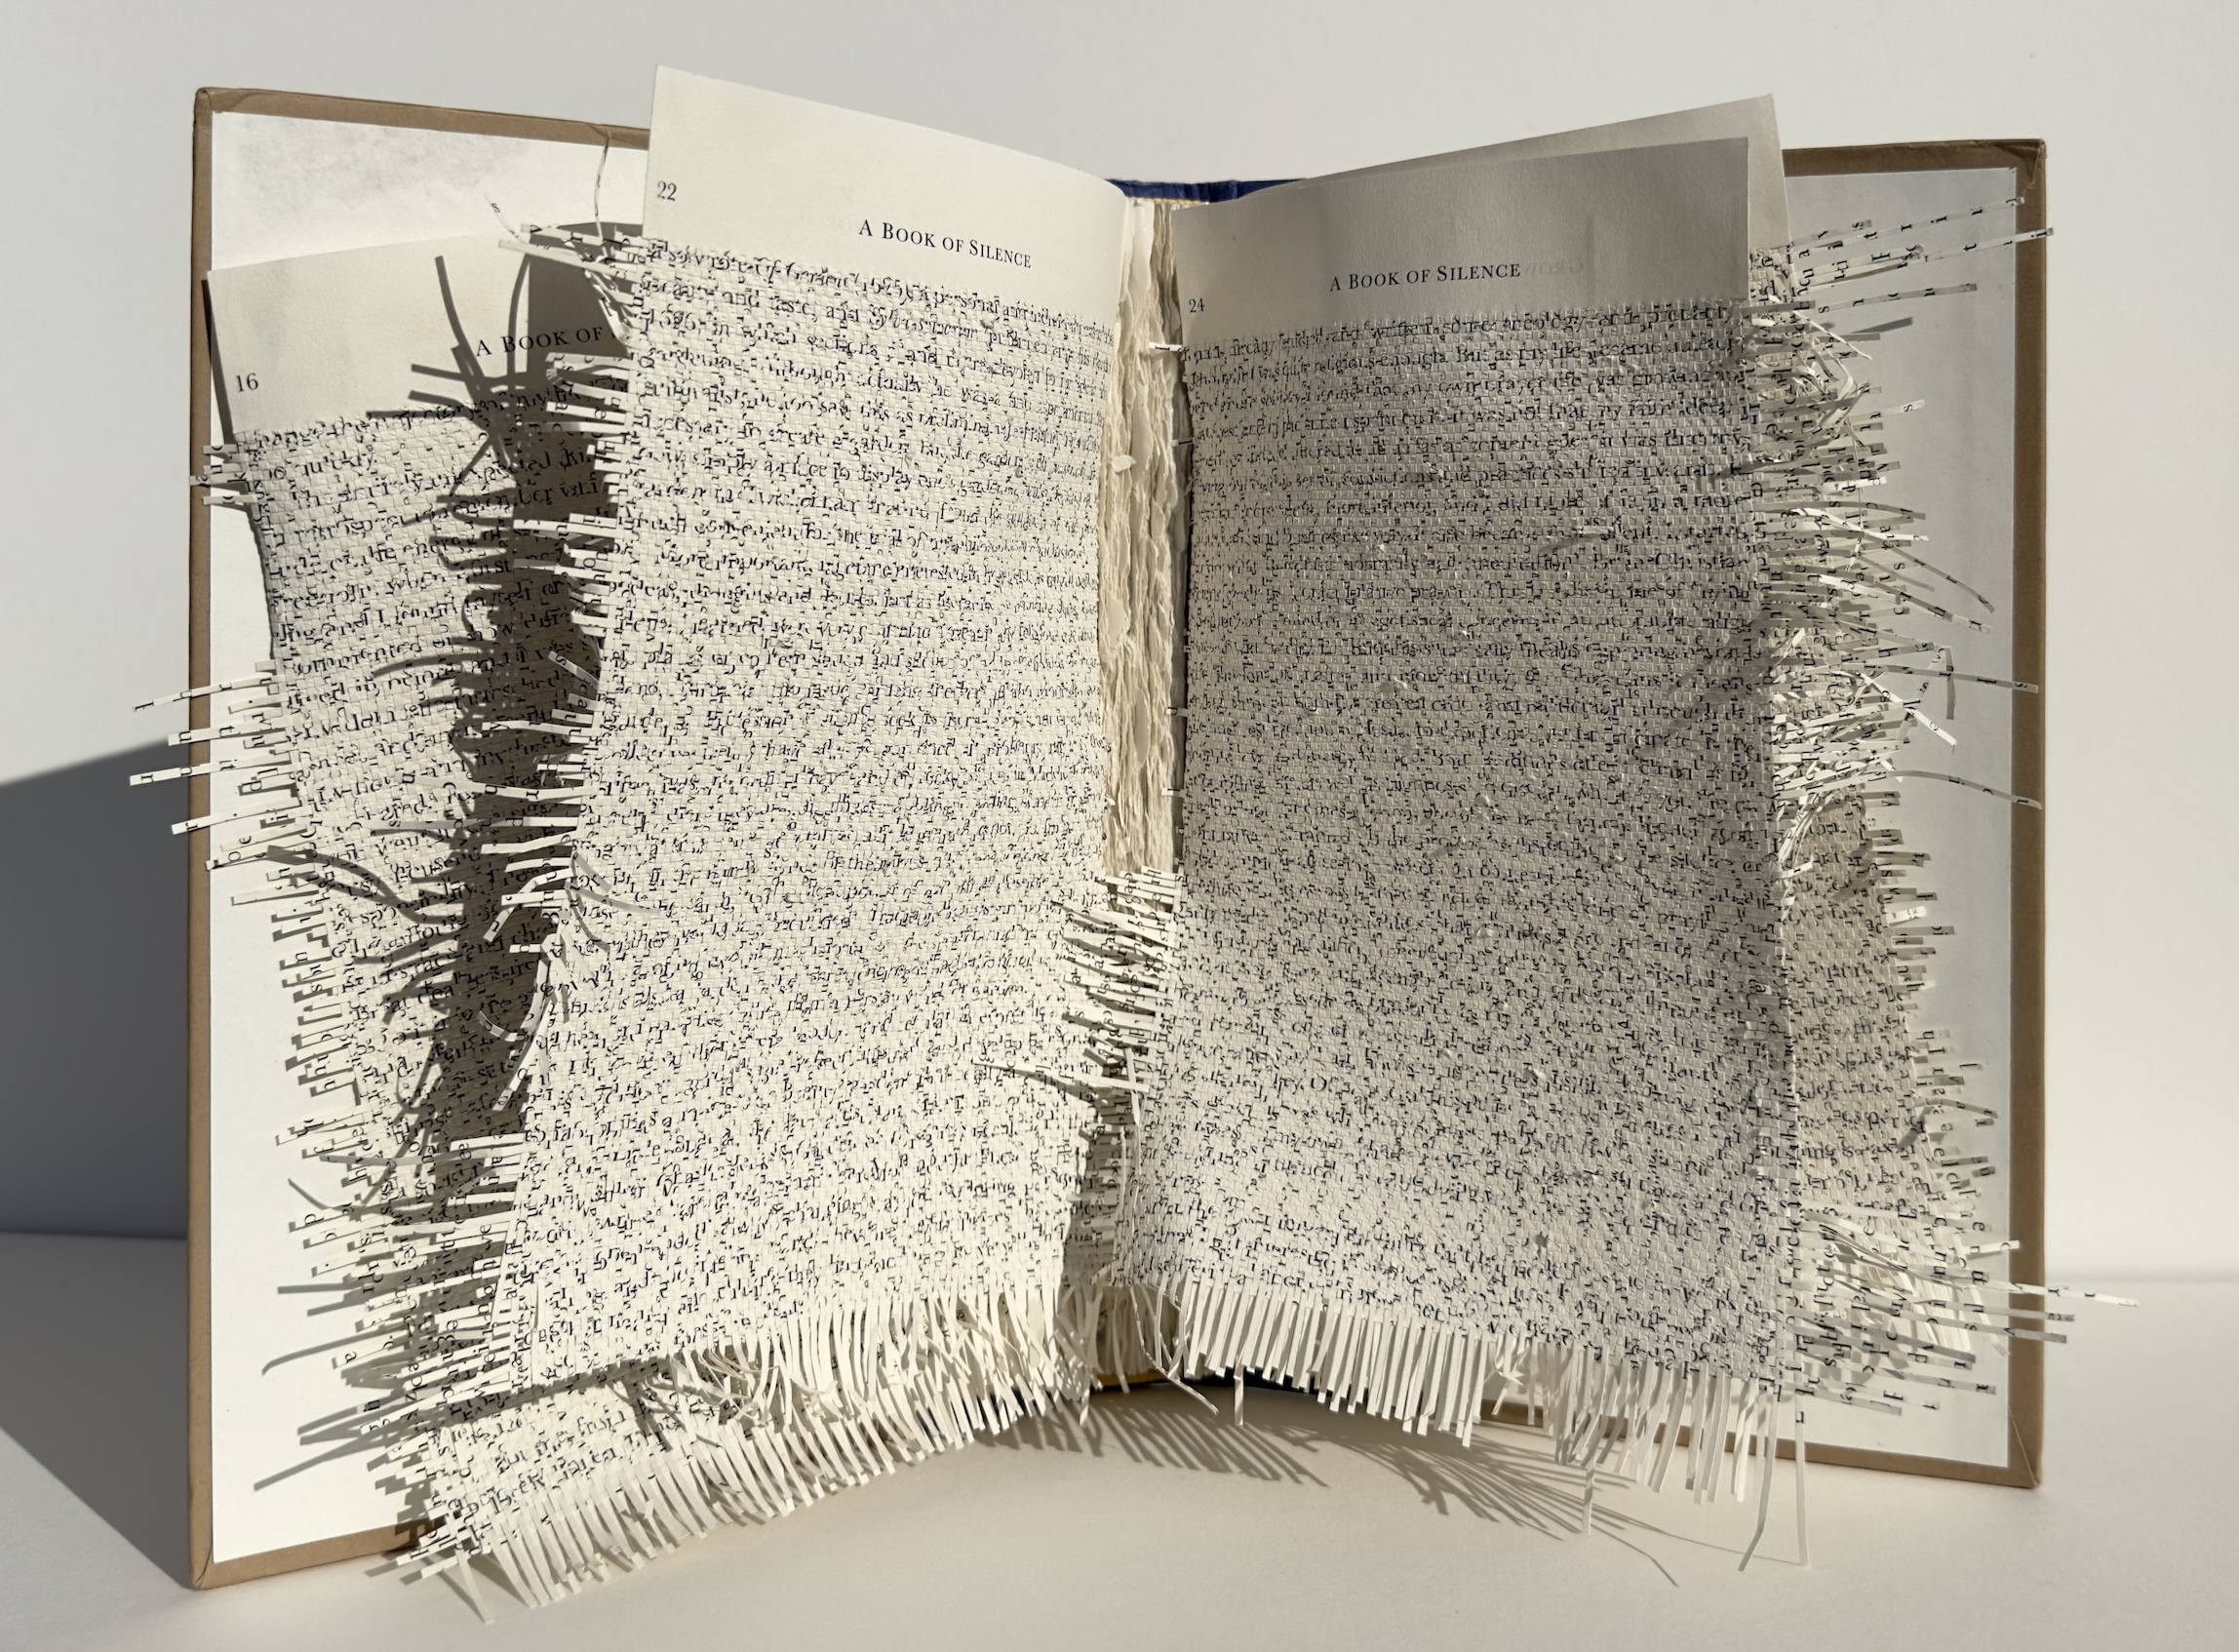 Youdhisthir Maharjan, book pages, text in art, woven pages